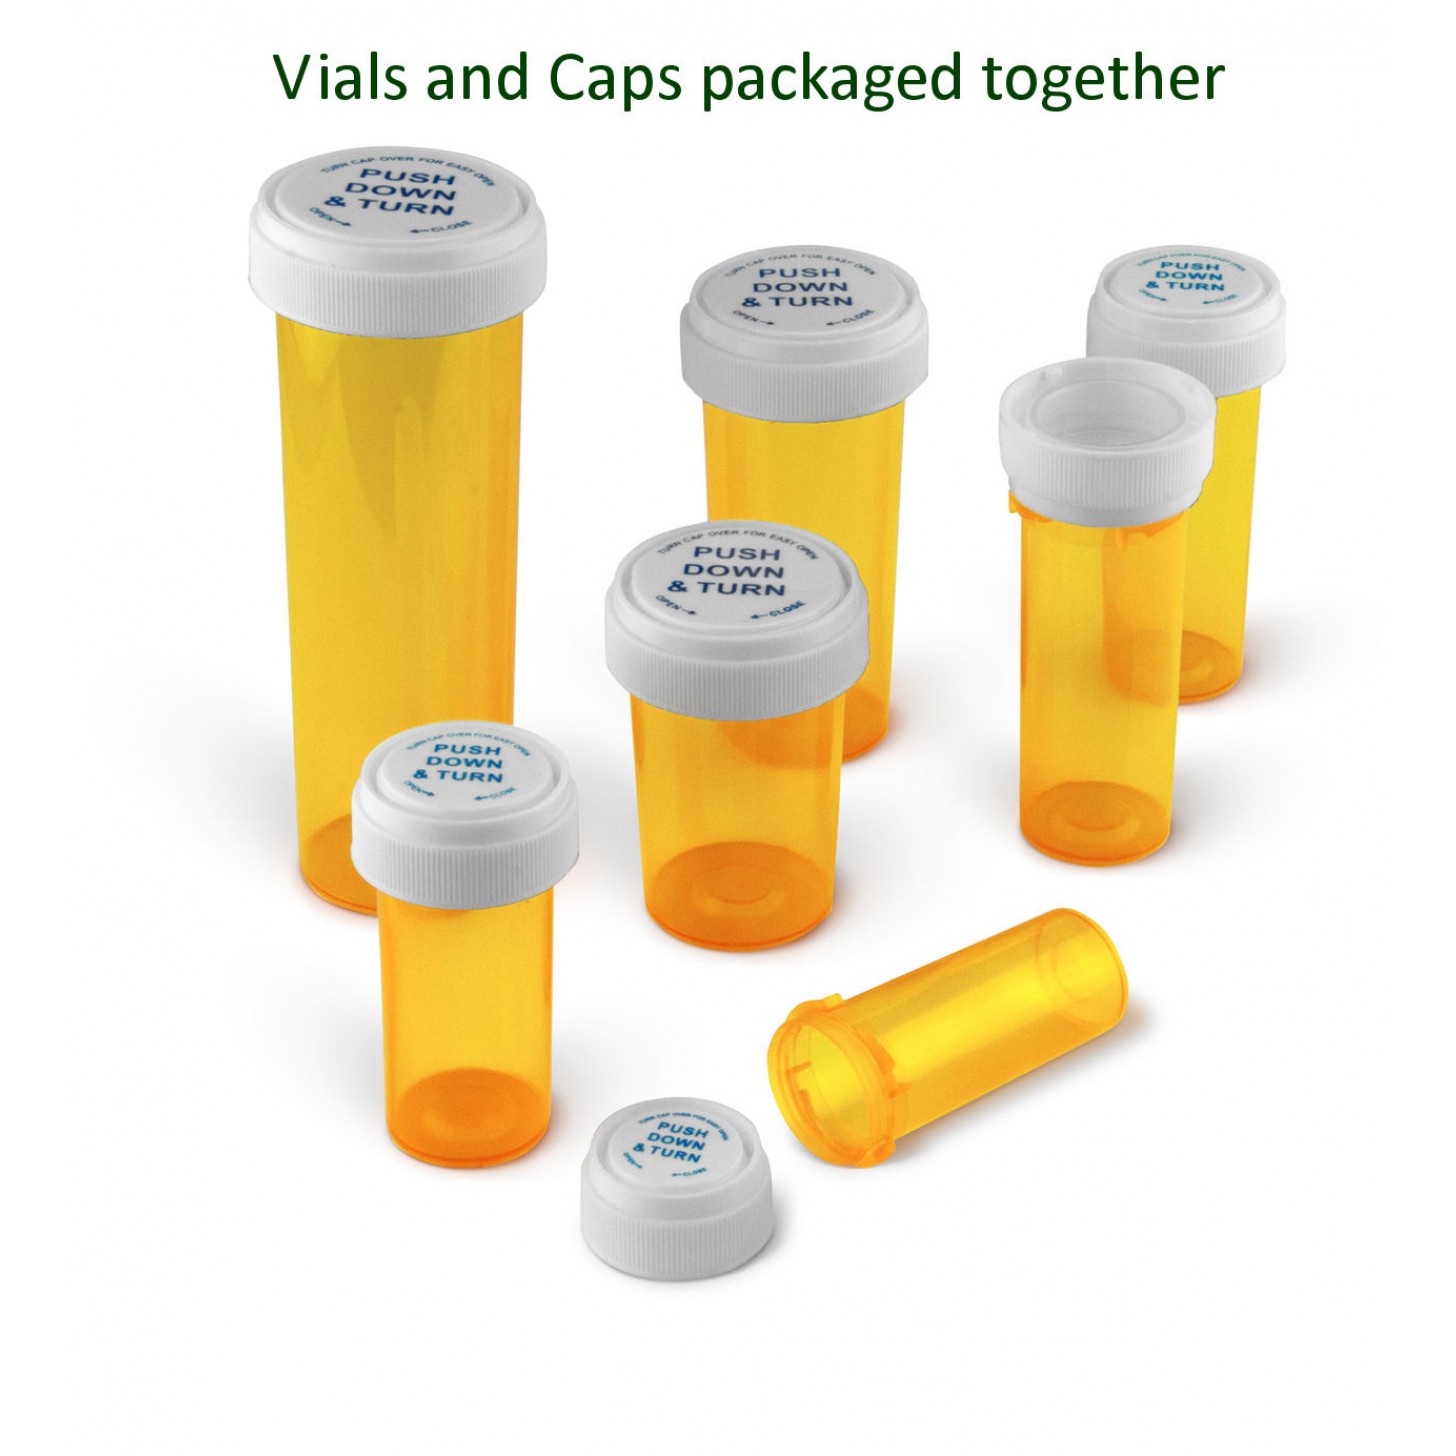 20Dr Reversible Cap Vials for Medicine Use with Child-Resistant